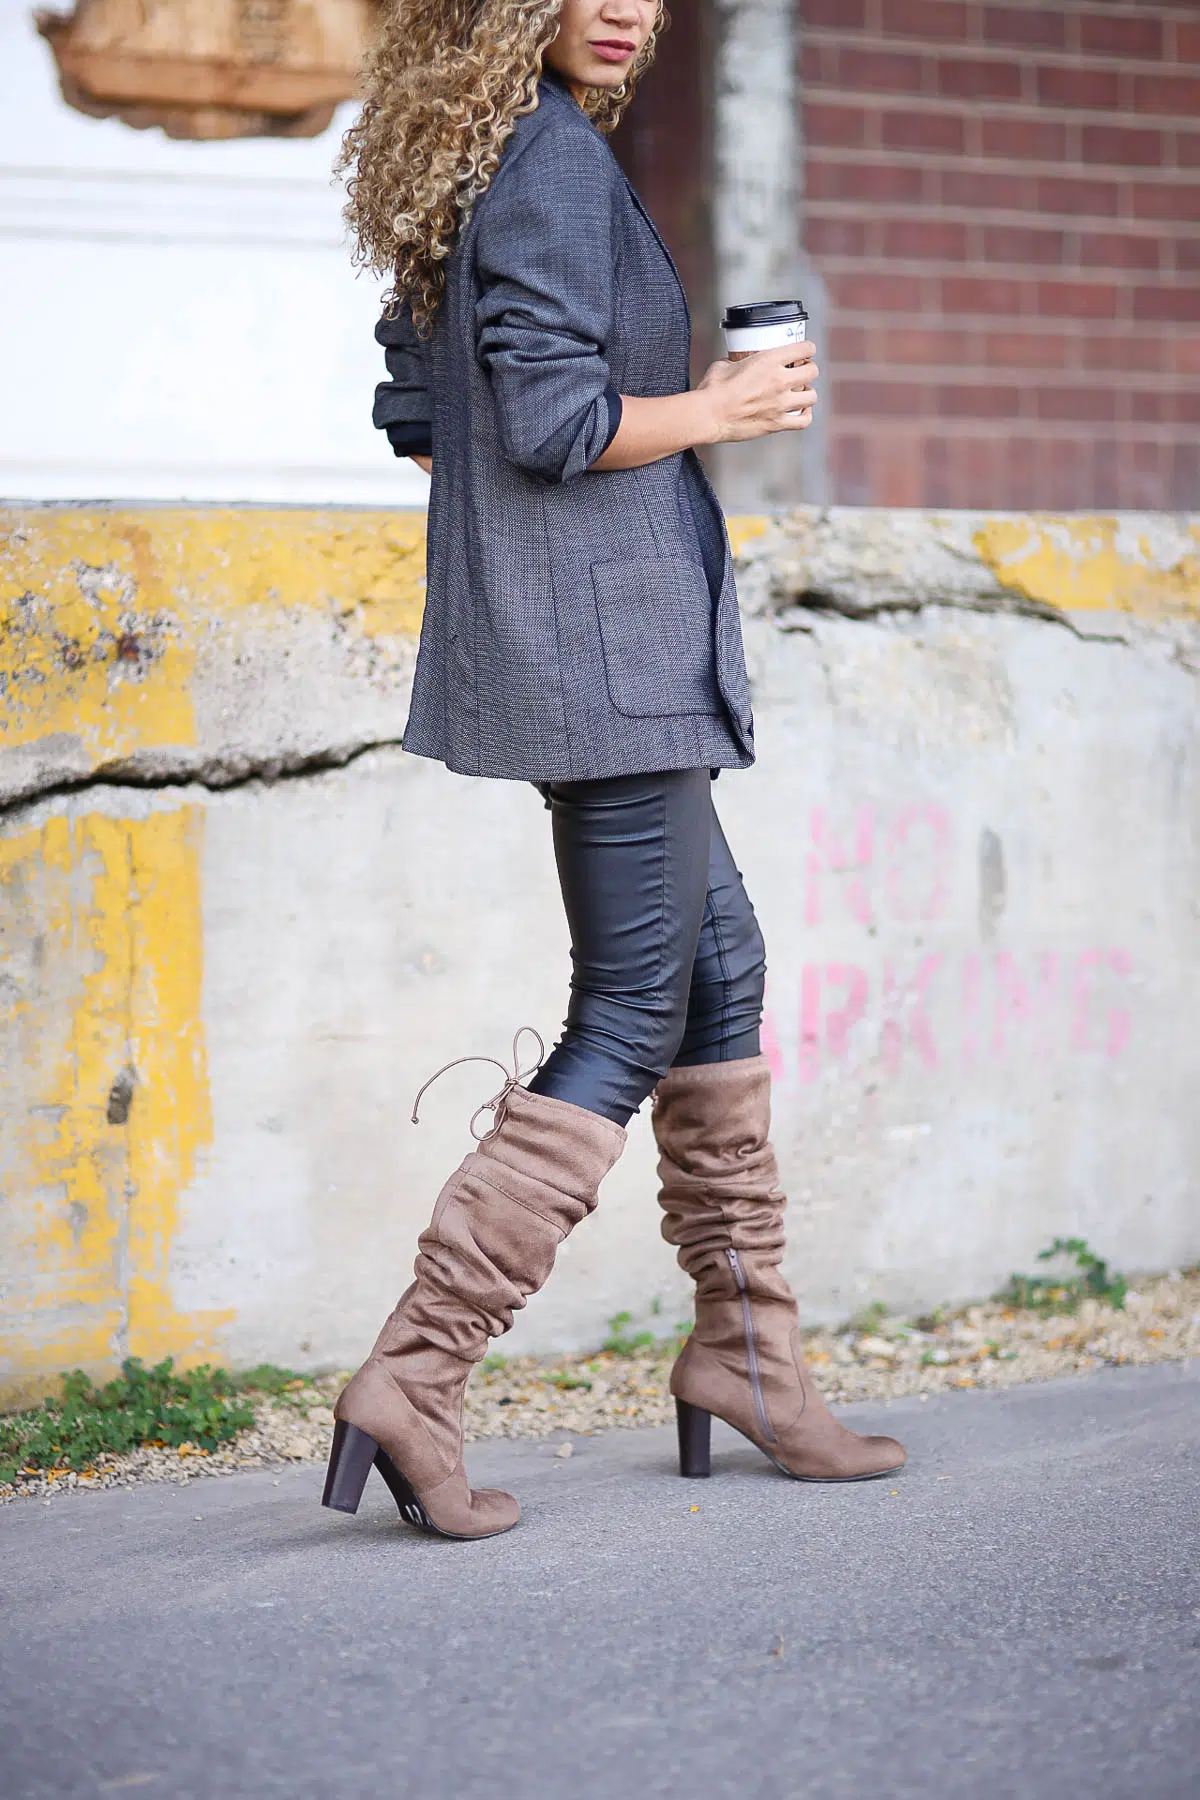 blazer, black leggings, and brown boot outfit